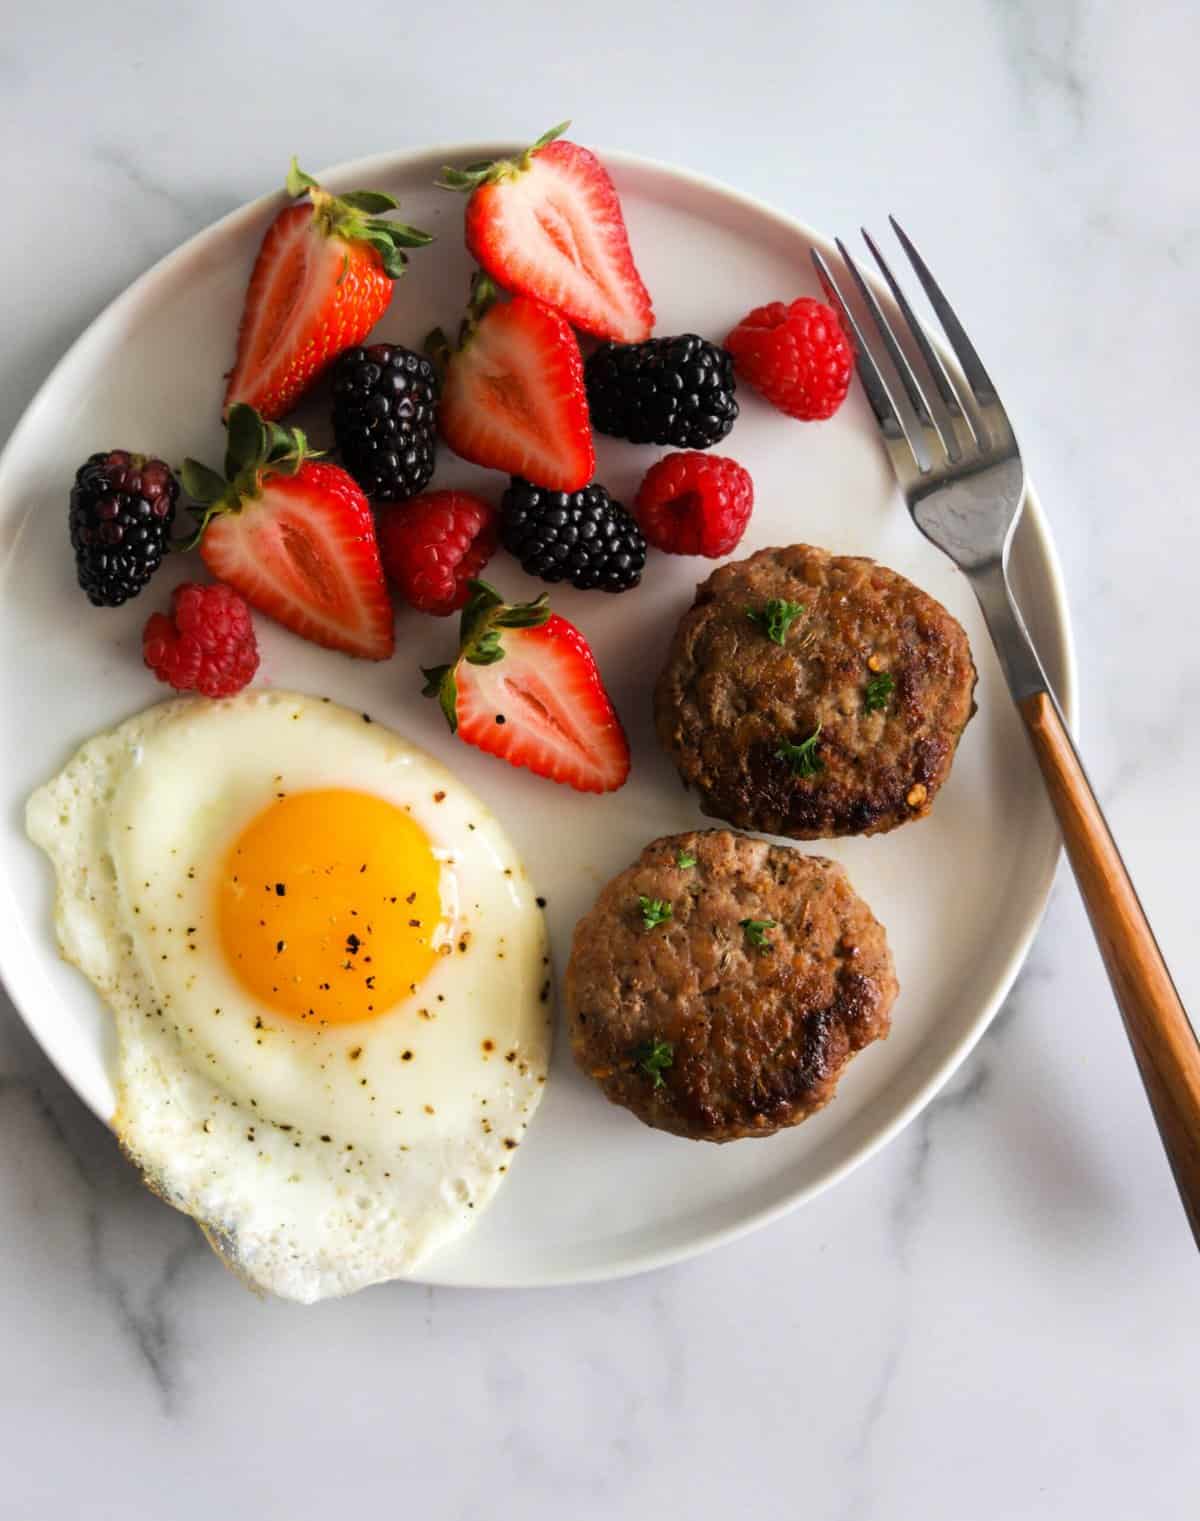 An overhead shot of a white plate with breakfast sausage, a fried egg and berries.